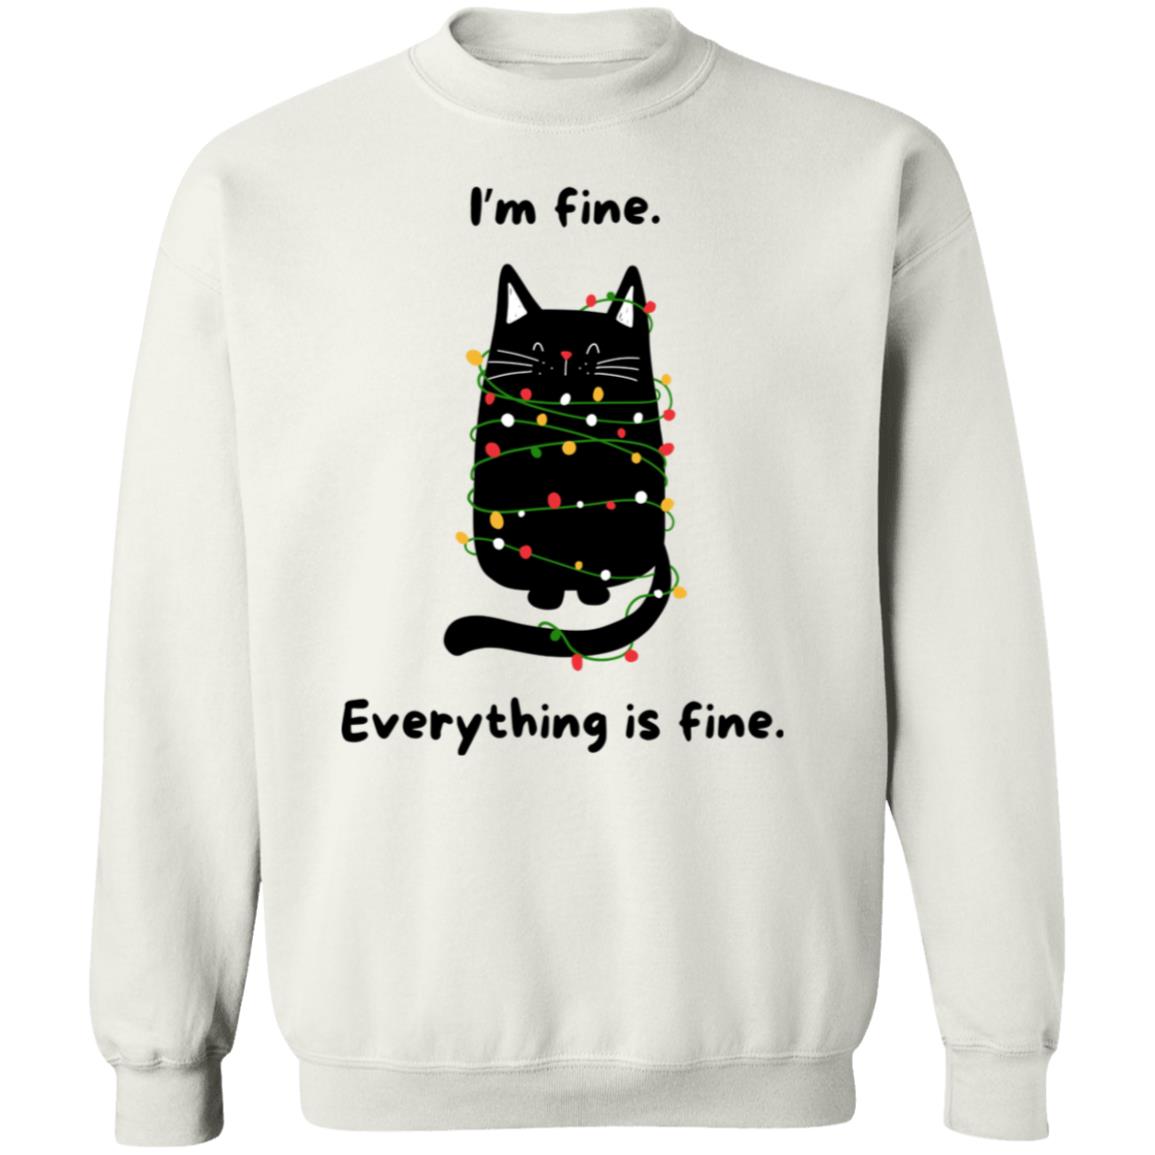 Get trendy with Everything is fine Cat Ugly Sweater - Sweatshirts available at Good Gift Company. Grab yours for $29.99 today!